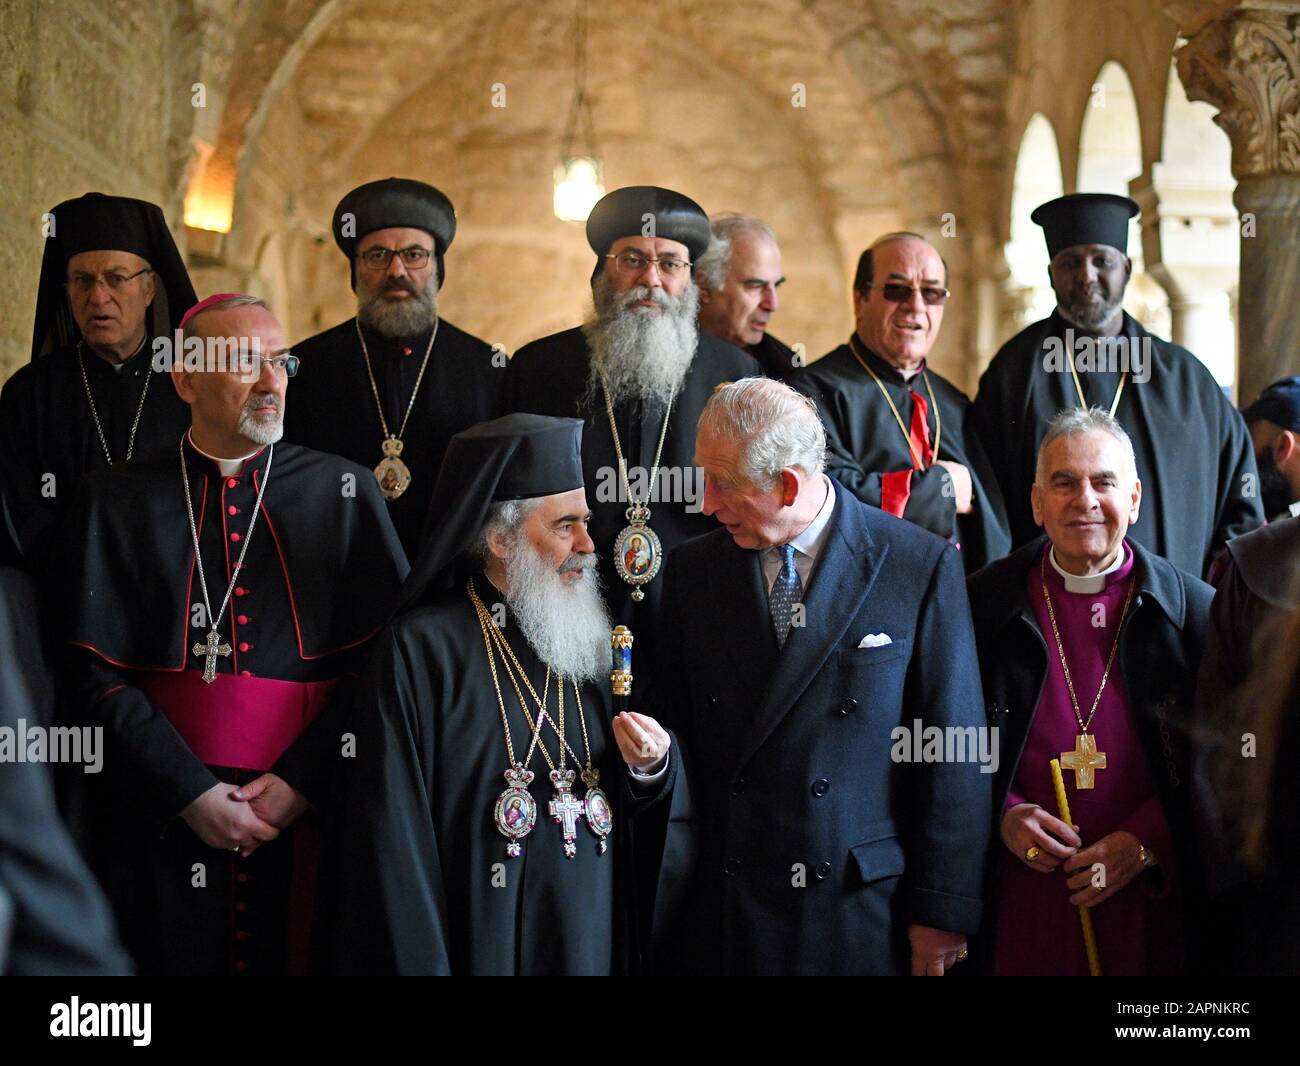 The Prince of Wales during a visit to the Church of the Nativity in Bethlehem on the second day of his visit to Israel and the occupied Palestinian territories. Stock Photo